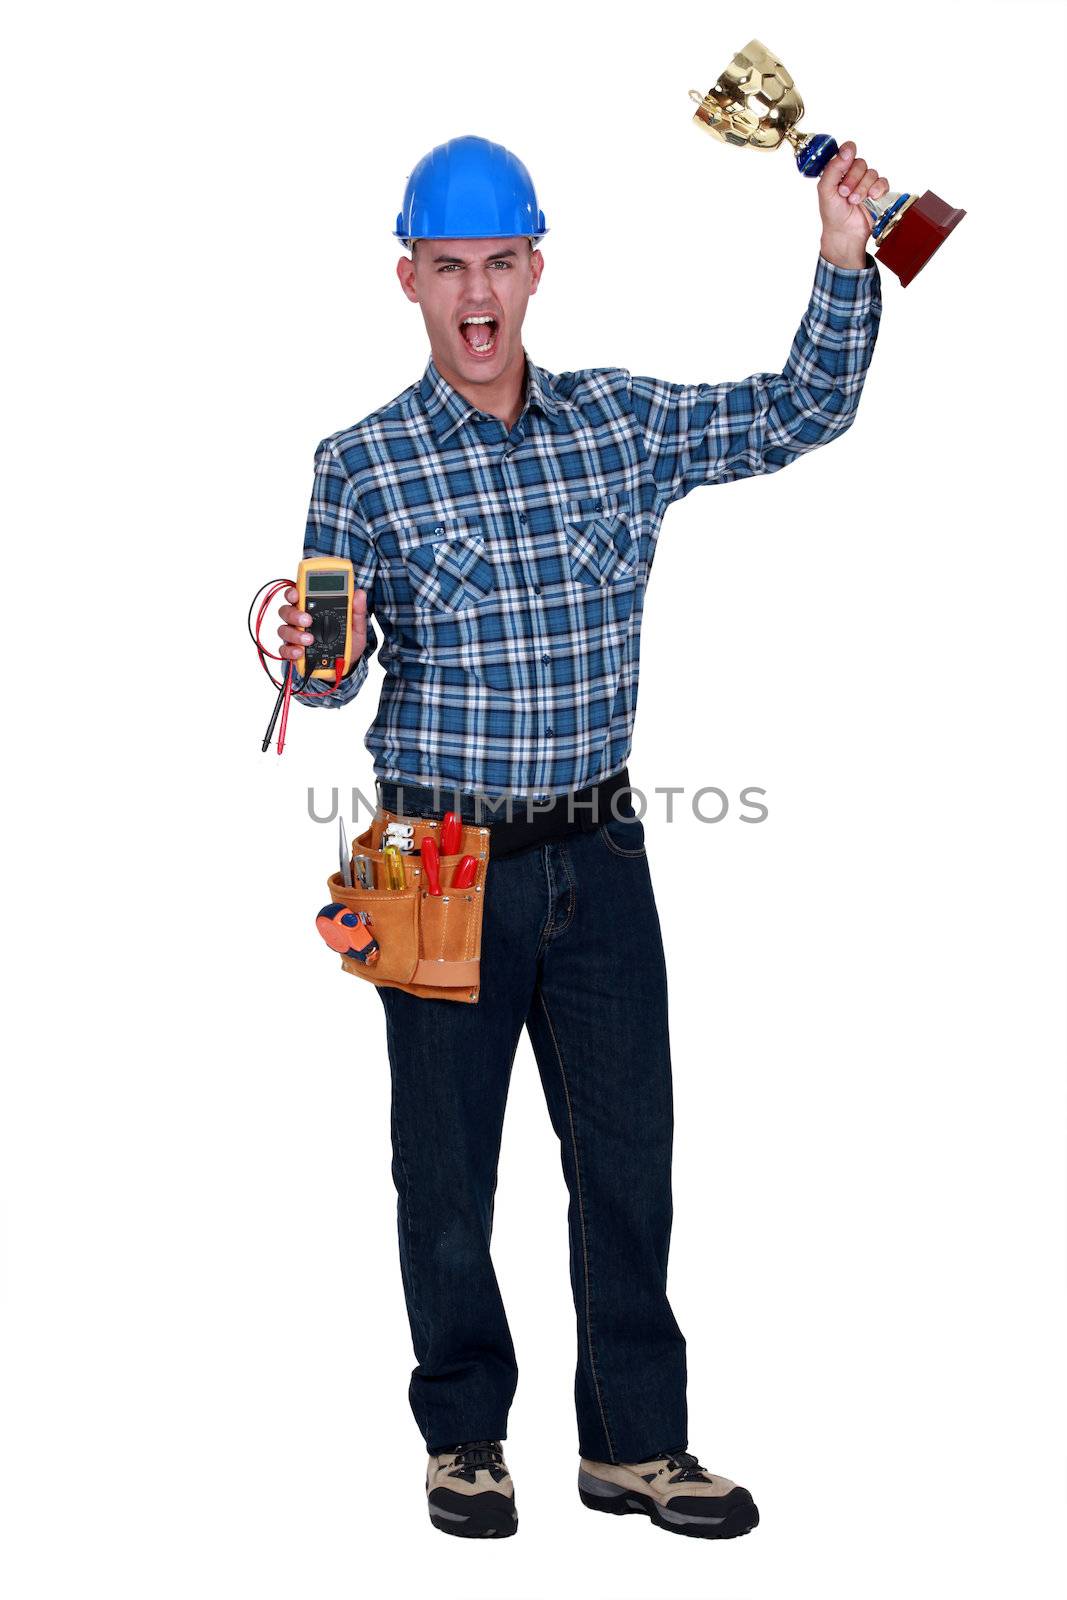 Man with a voltmeter and a trophy in hand by phovoir